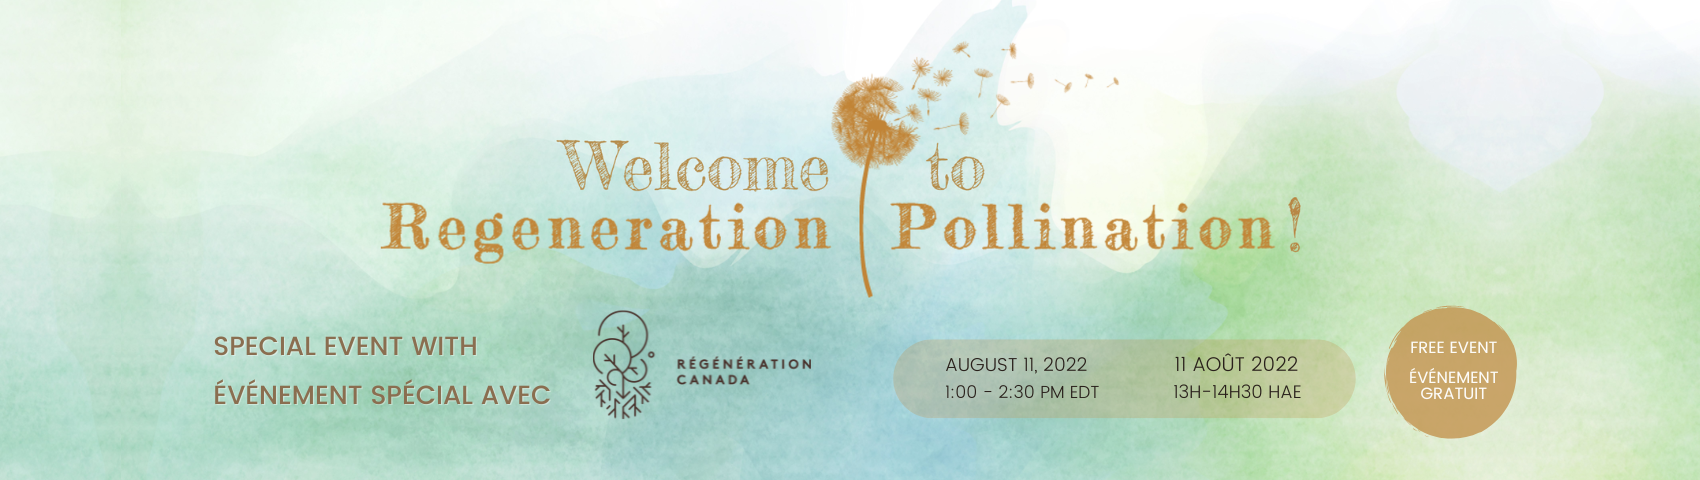 Welcome to Regeneration Pollination! Special event with Regeneration Canada. August 11, 2022, 1:00-2:30 PM EDT. Free event